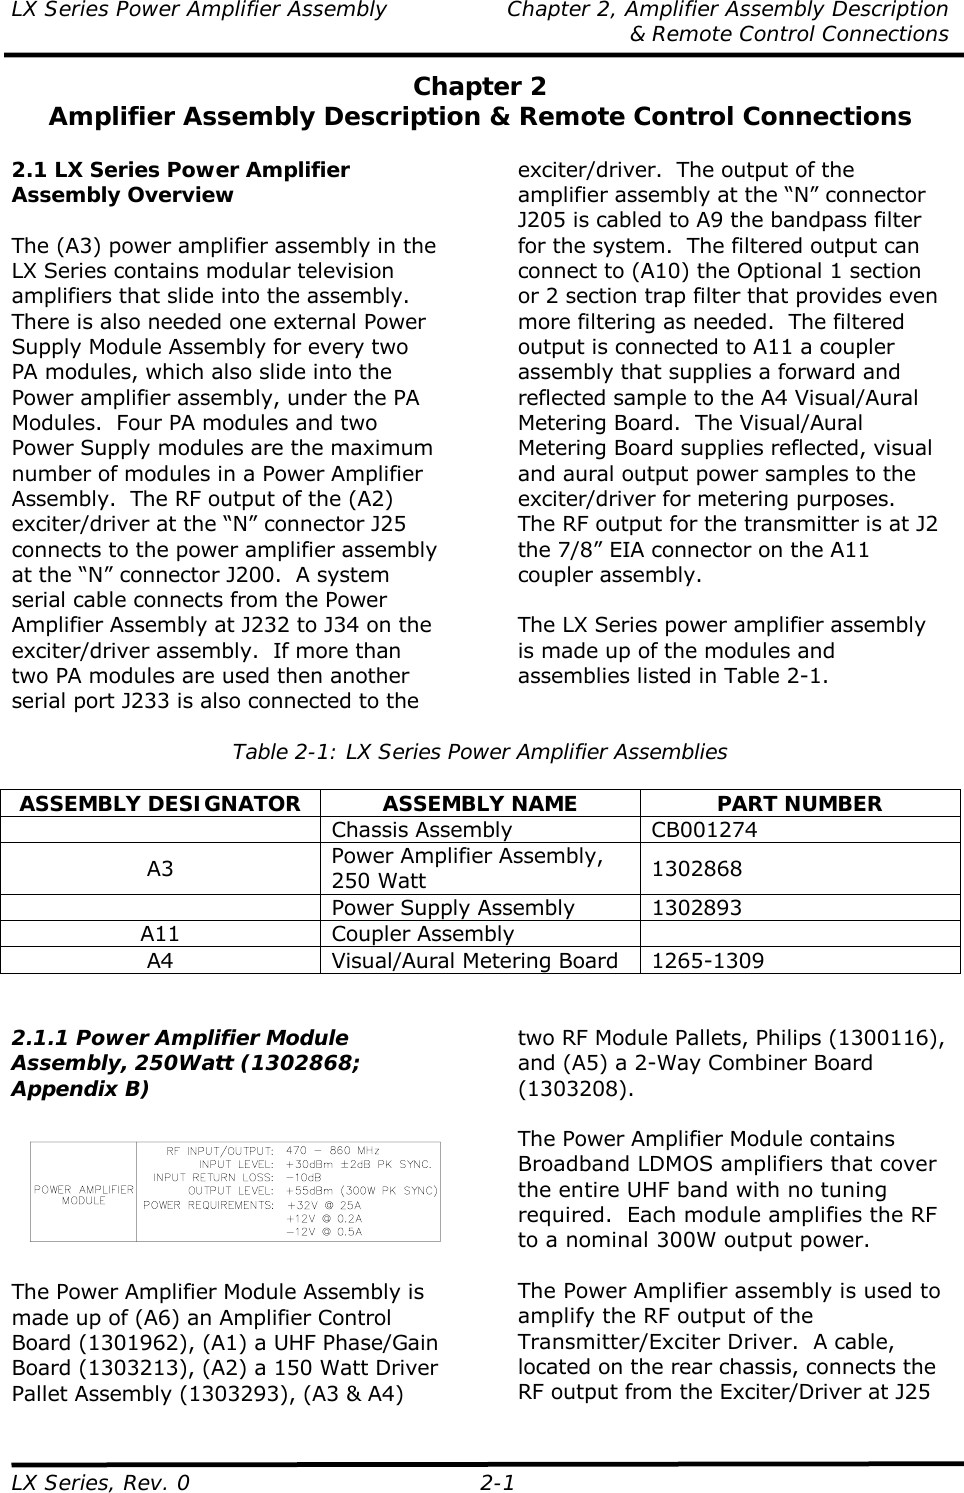 LX Series Power Amplifier Assembly  Chapter 2, Amplifier Assembly Description   &amp; Remote Control Connections LX Series, Rev. 0  2-1 Chapter 2 Amplifier Assembly Description &amp; Remote Control Connections  2.1 LX Series Power Amplifier Assembly Overview  The (A3) power amplifier assembly in the LX Series contains modular television amplifiers that slide into the assembly.  There is also needed one external Power Supply Module Assembly for every two PA modules, which also slide into the Power amplifier assembly, under the PA Modules.  Four PA modules and two Power Supply modules are the maximum number of modules in a Power Amplifier Assembly.  The RF output of the (A2) exciter/driver at the “N” connector J25 connects to the power amplifier assembly at the “N” connector J200.  A system serial cable connects from the Power Amplifier Assembly at J232 to J34 on the exciter/driver assembly.  If more than two PA modules are used then another serial port J233 is also connected to the exciter/driver.  The output of the amplifier assembly at the “N” connector J205 is cabled to A9 the bandpass filter for the system.  The filtered output can connect to (A10) the Optional 1 section or 2 section trap filter that provides even more filtering as needed.  The filtered output is connected to A11 a coupler assembly that supplies a forward and reflected sample to the A4 Visual/Aural Metering Board.  The Visual/Aural Metering Board supplies reflected, visual and aural output power samples to the exciter/driver for metering purposes.  The RF output for the transmitter is at J2 the 7/8” EIA connector on the A11 coupler assembly.  The LX Series power amplifier assembly is made up of the modules and assemblies listed in Table 2-1.  Table 2-1: LX Series Power Amplifier Assemblies  ASSEMBLY DESIGNATOR  ASSEMBLY NAME  PART NUMBER  Chassis Assembly CB001274 A3  Power Amplifier Assembly, 250 Watt  1302868   Power Supply Assembly  1302893 A11 Coupler Assembly  A4  Visual/Aural Metering Board  1265-1309   2.1.1 Power Amplifier Module Assembly, 250Watt (1302868; Appendix B)    The Power Amplifier Module Assembly is made up of (A6) an Amplifier Control Board (1301962), (A1) a UHF Phase/Gain Board (1303213), (A2) a 150 Watt Driver Pallet Assembly (1303293), (A3 &amp; A4) two RF Module Pallets, Philips (1300116), and (A5) a 2-Way Combiner Board (1303208).  The Power Amplifier Module contains Broadband LDMOS amplifiers that cover the entire UHF band with no tuning required.  Each module amplifies the RF to a nominal 300W output power.  The Power Amplifier assembly is used to amplify the RF output of the Transmitter/Exciter Driver.  A cable, located on the rear chassis, connects the RF output from the Exciter/Driver at J25 